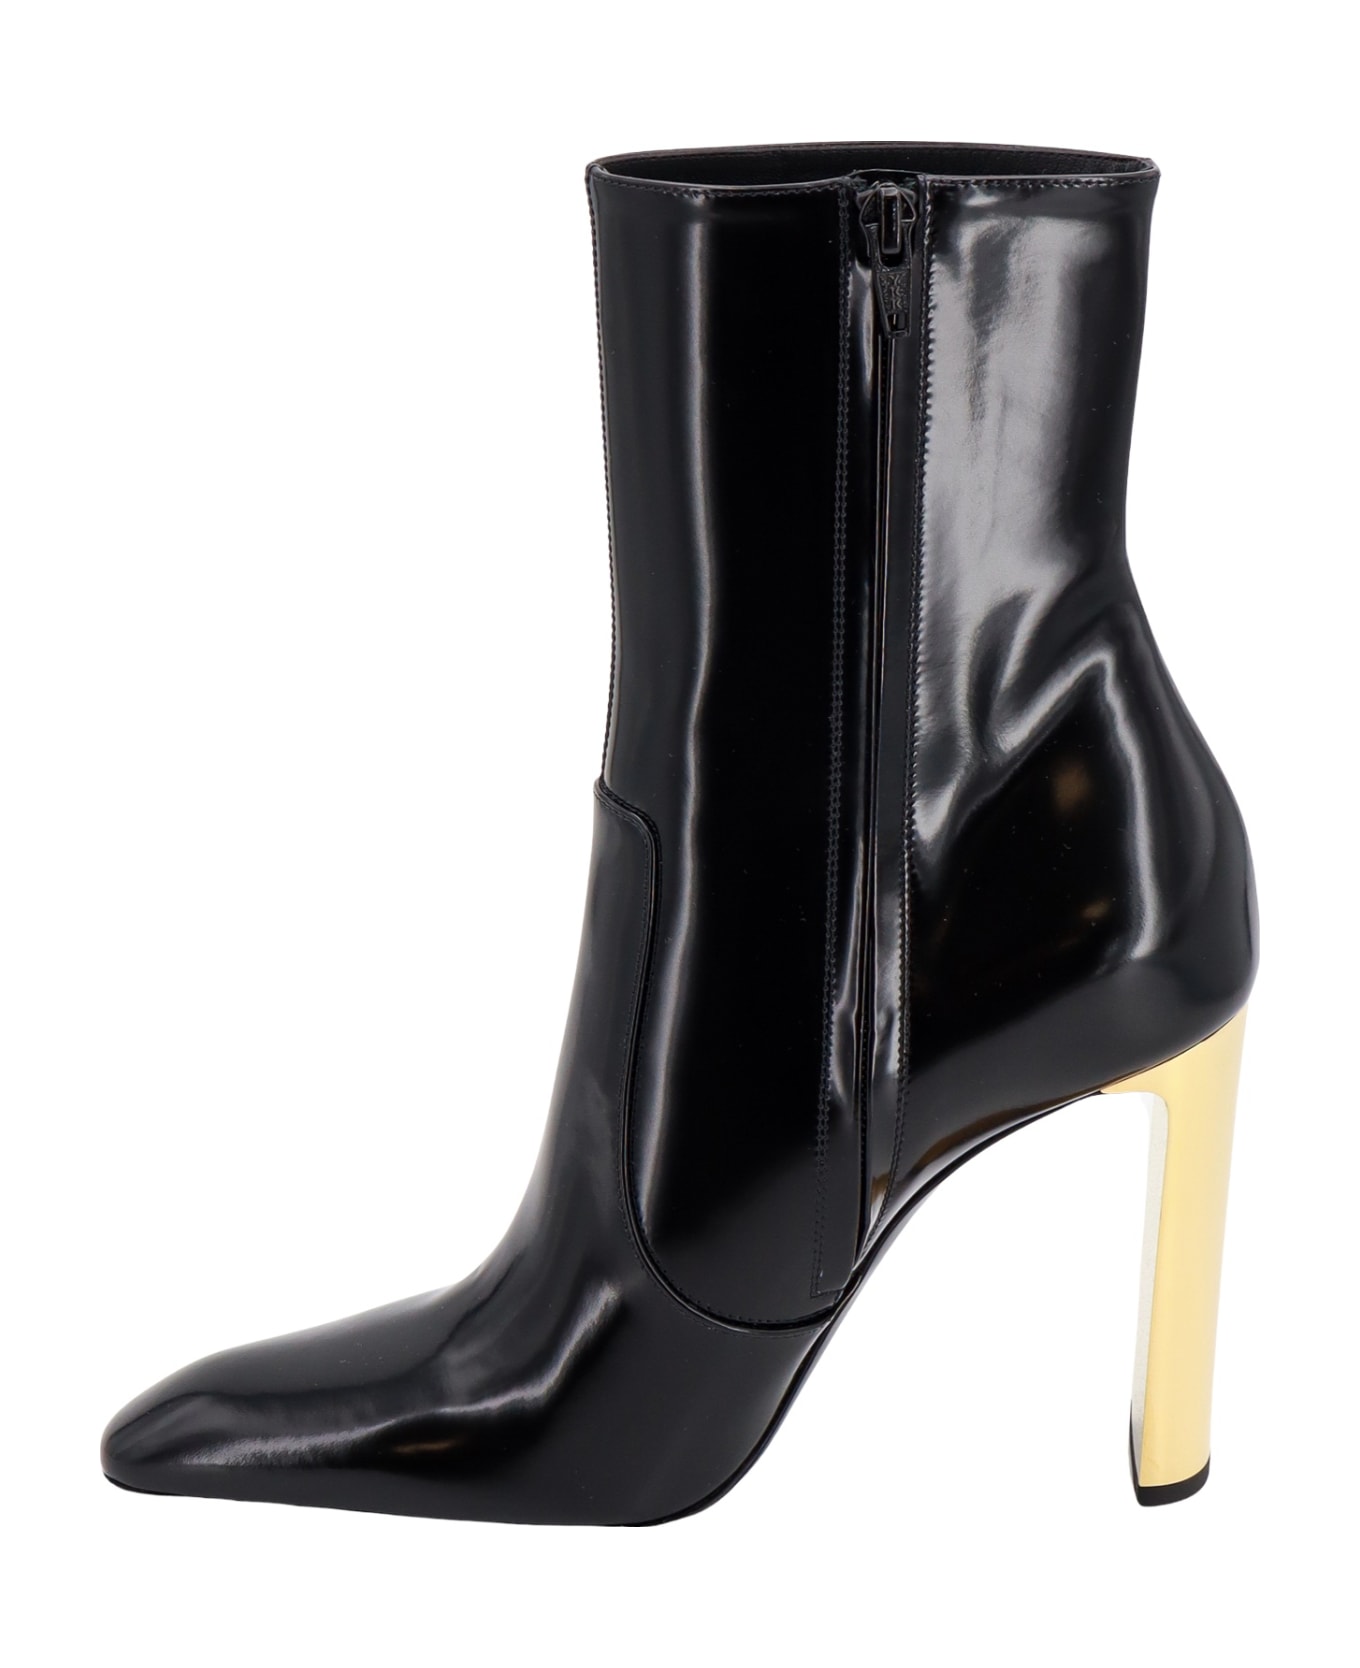 Saint Laurent Ankle Boot In Glazed Leather And Gold Heel - Black